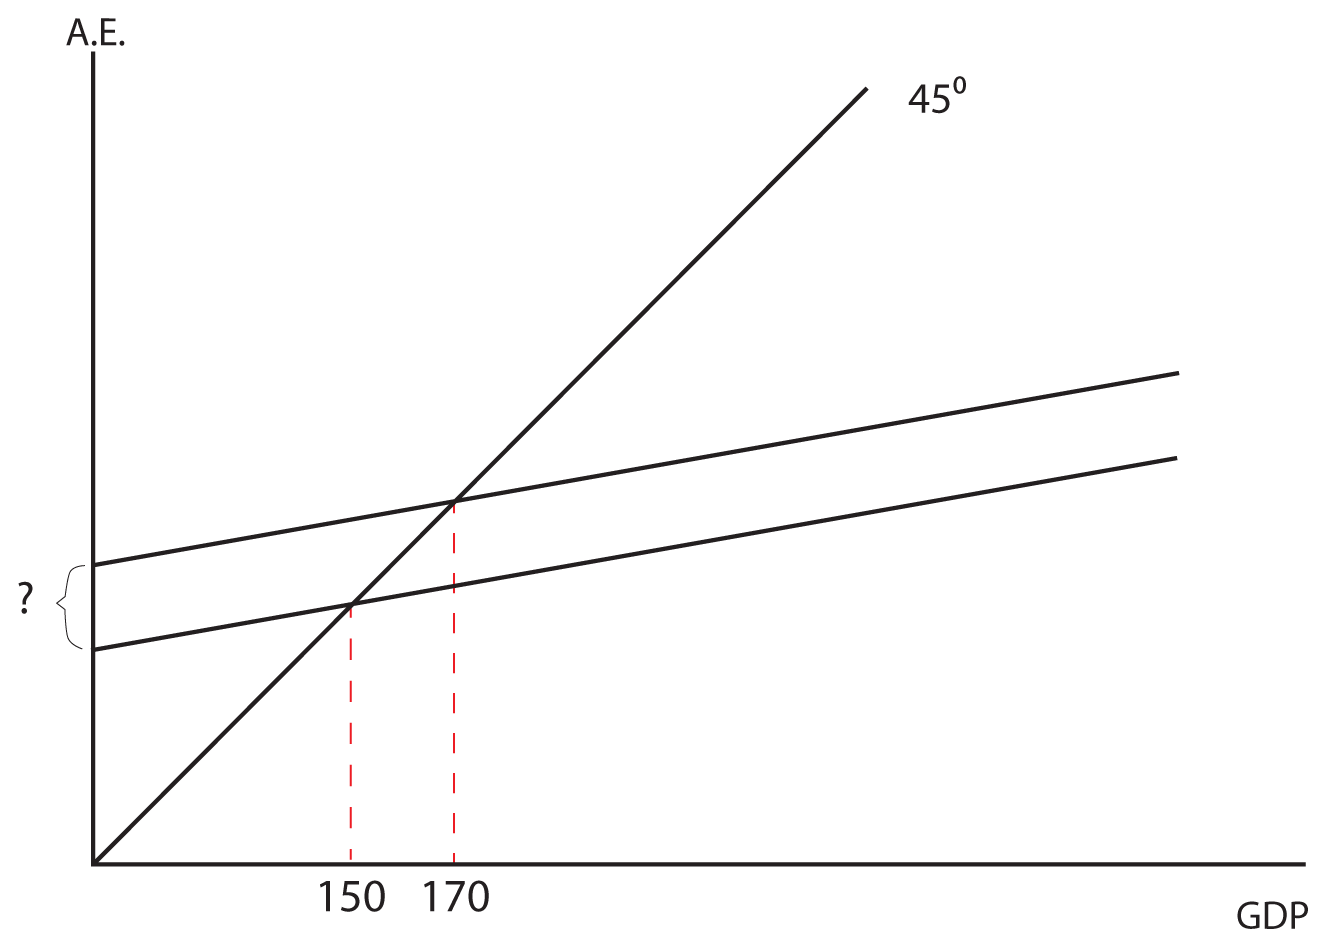 Image 7.07: The image shows a graph. The y axis is labeled A.E. The x axis is labeled GDP. There is a 45 degree line drawn from the origin. There are two lines of equal slope drawn from the y axis, the difference between the two is marked by a question mark. Vertical lines are drawn from the intersection points of the two lines and the 45 degree line. The first intersection point is labeled 150 on the x axis, the second is labeled 170.